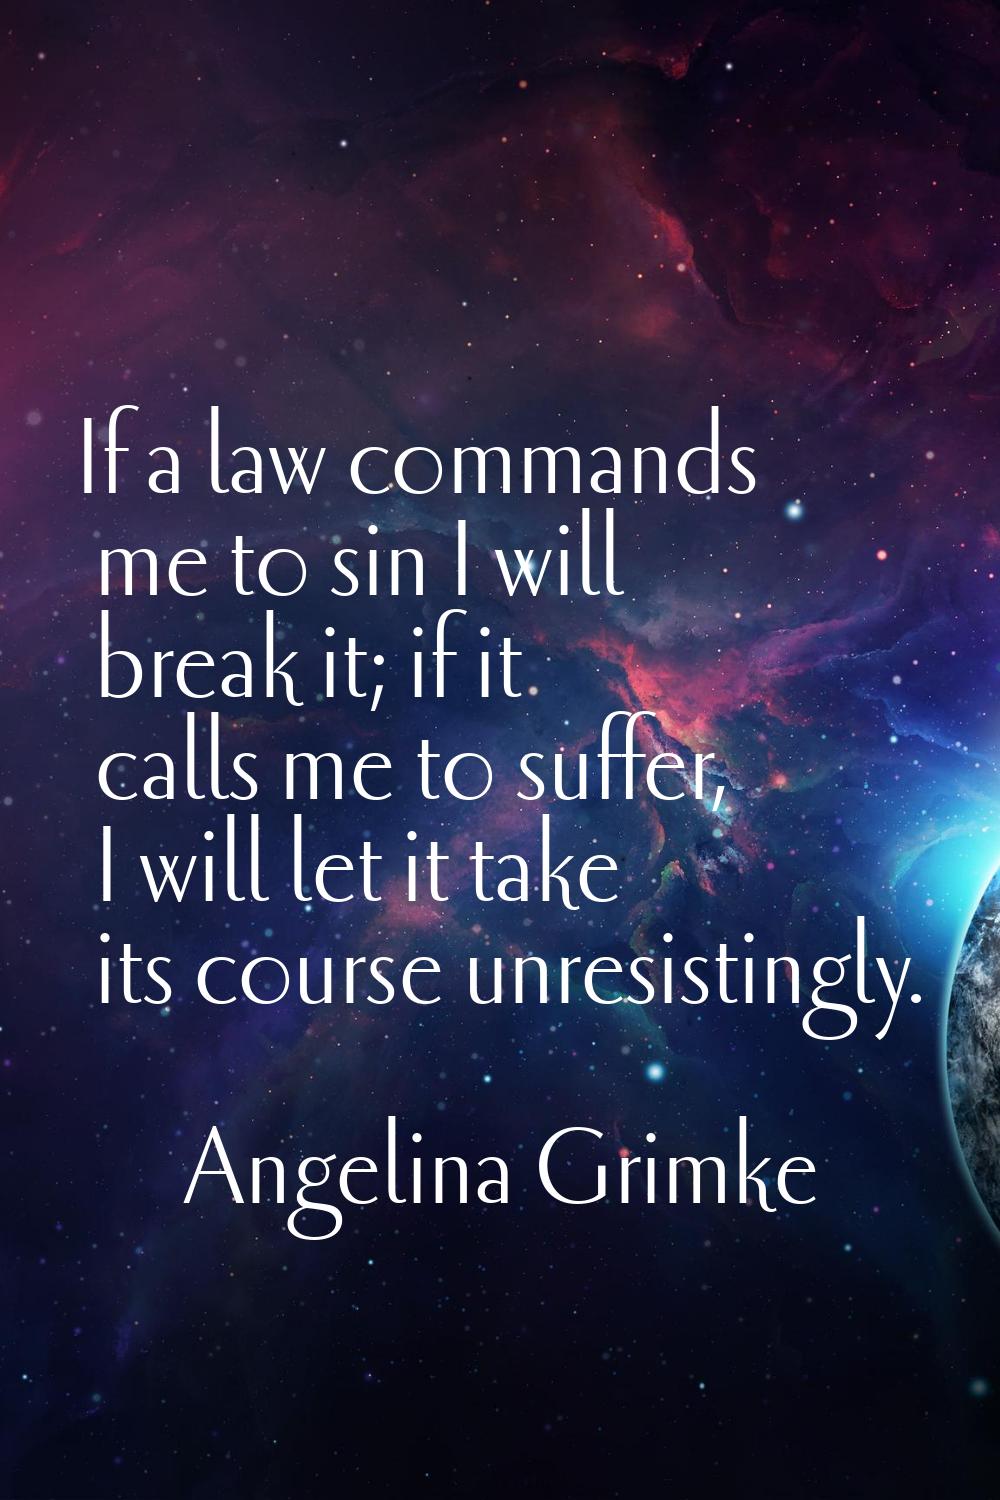 If a law commands me to sin I will break it; if it calls me to suffer, I will let it take its cours